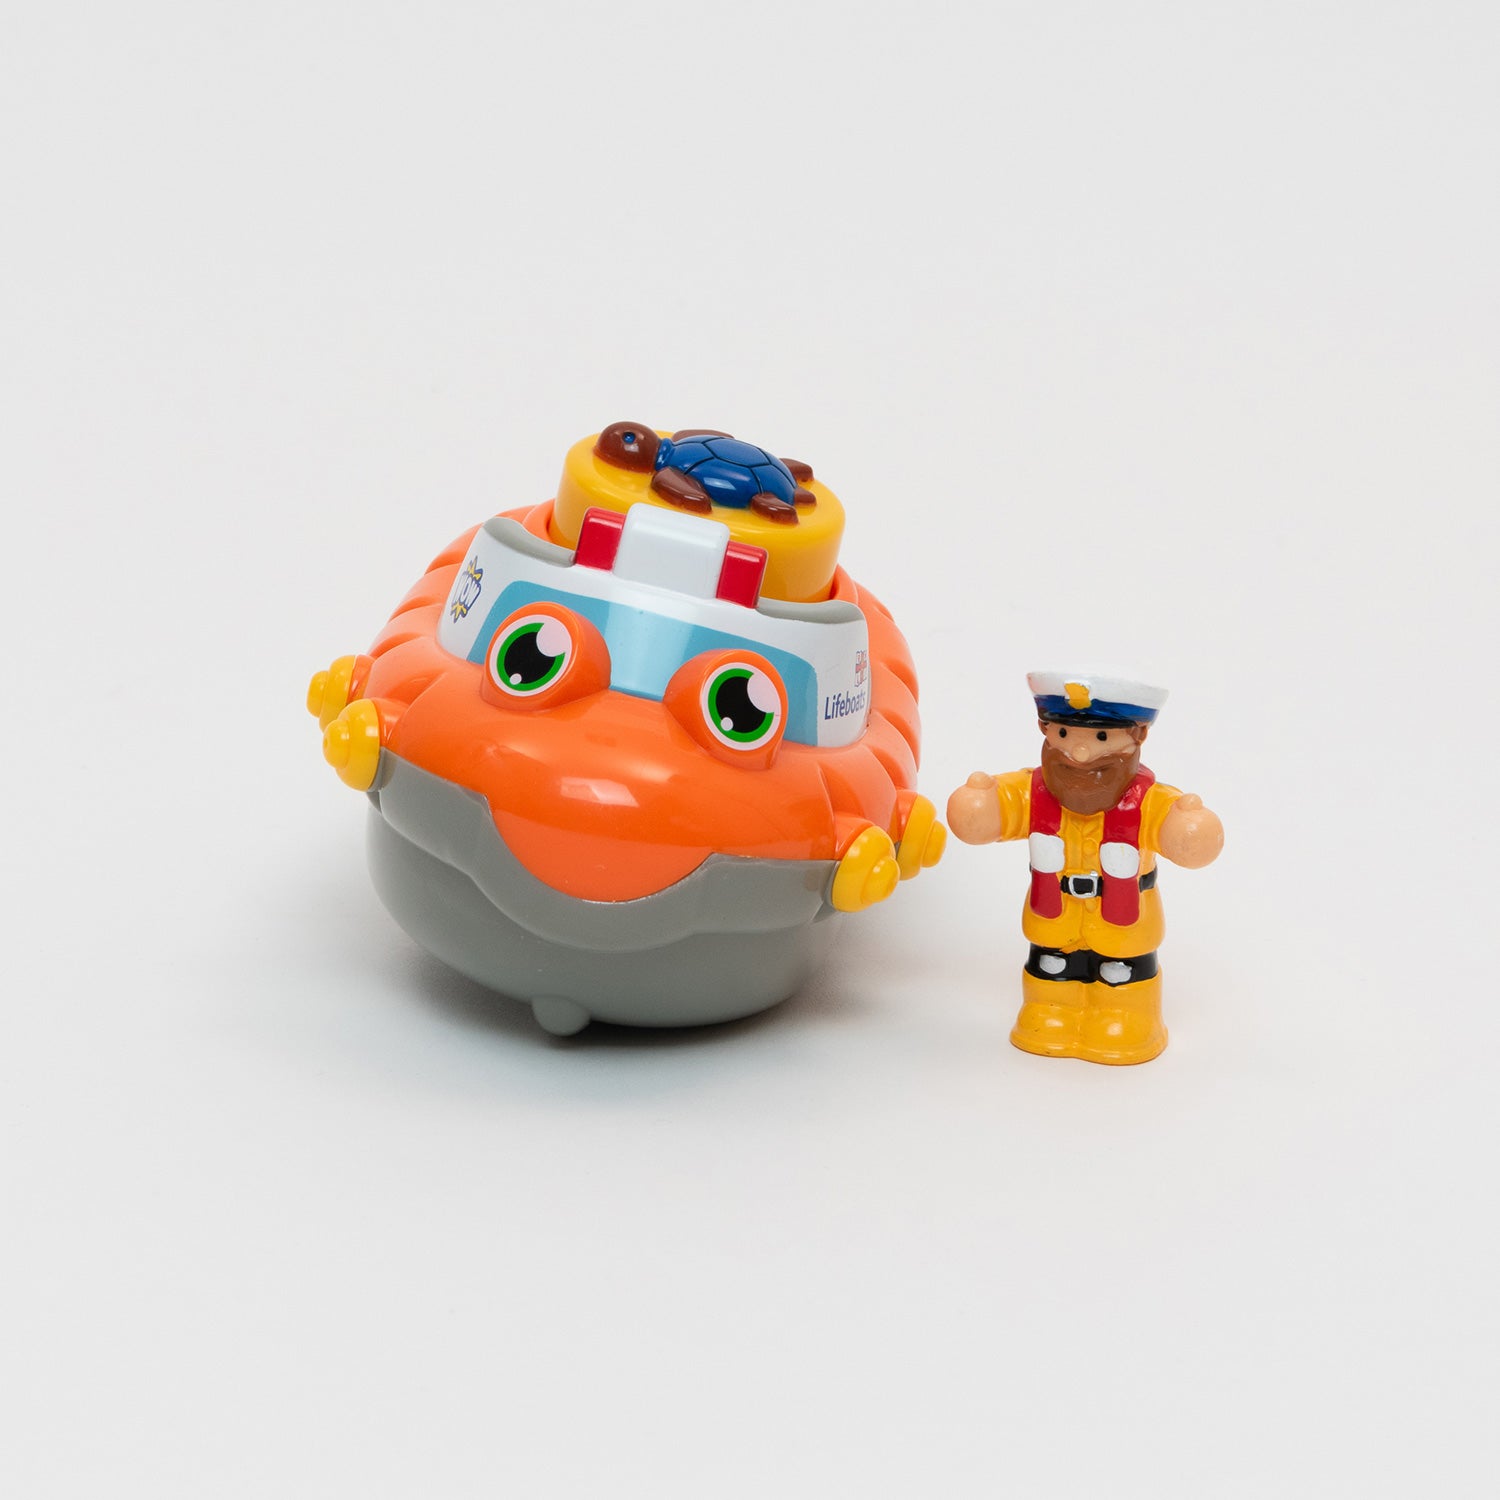 An RNLI lifeboat bath toy with mini lifeboat man figurine. 